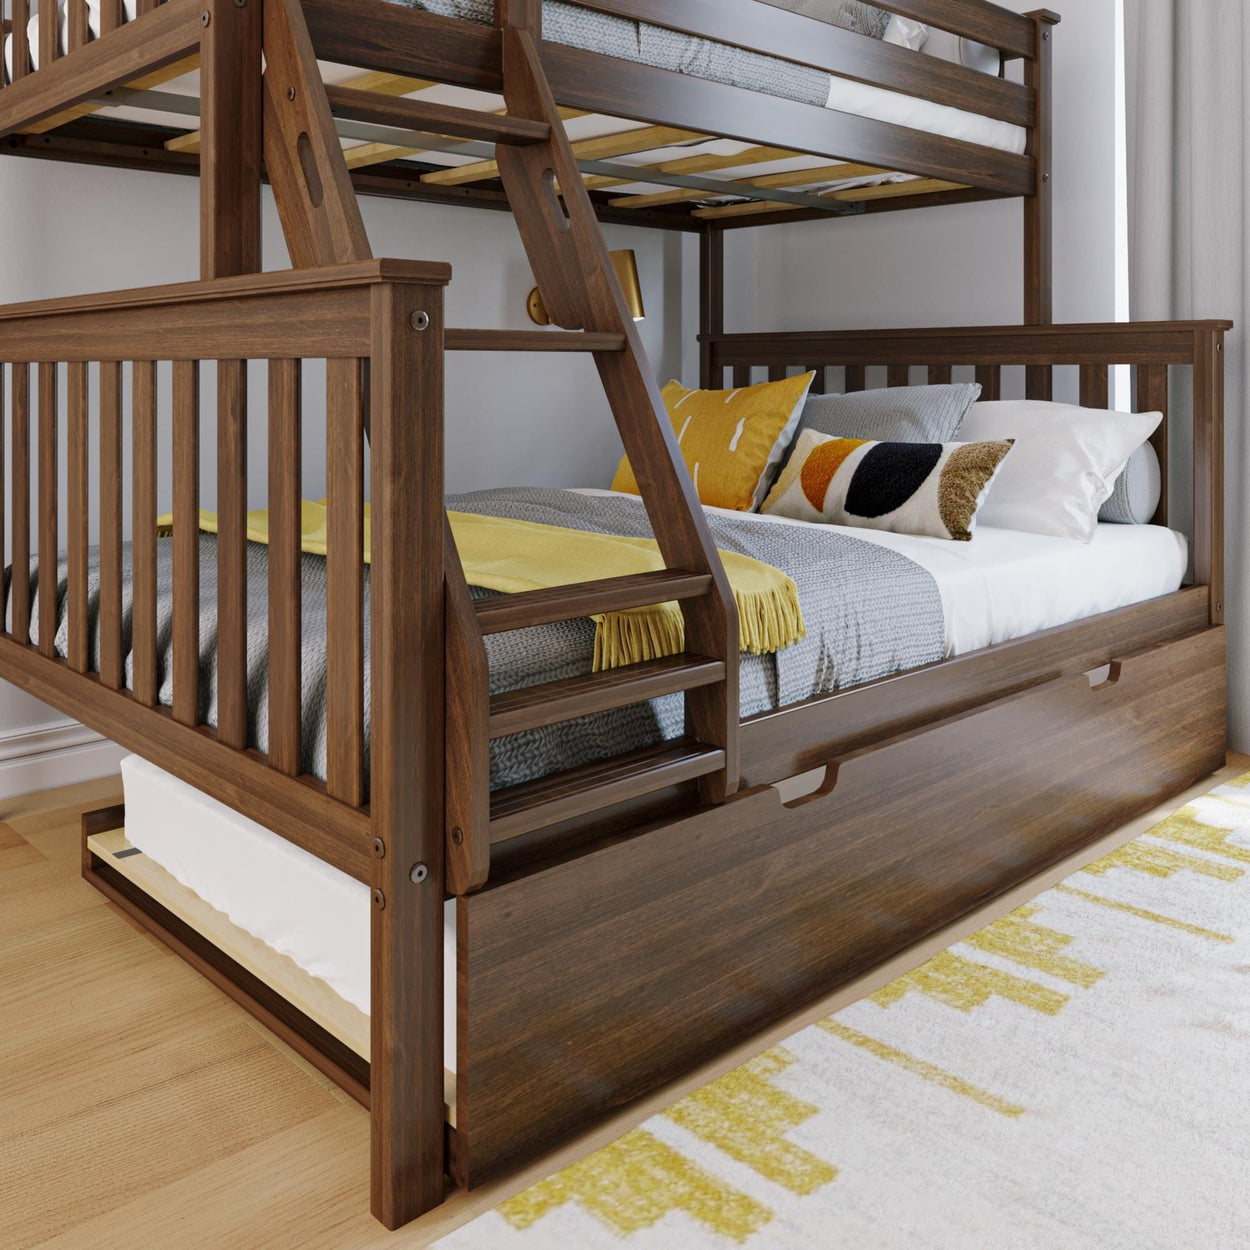 186231-008 : Bunk Beds Classic Twin over Full Bunk Bed with Trundle, Walnut